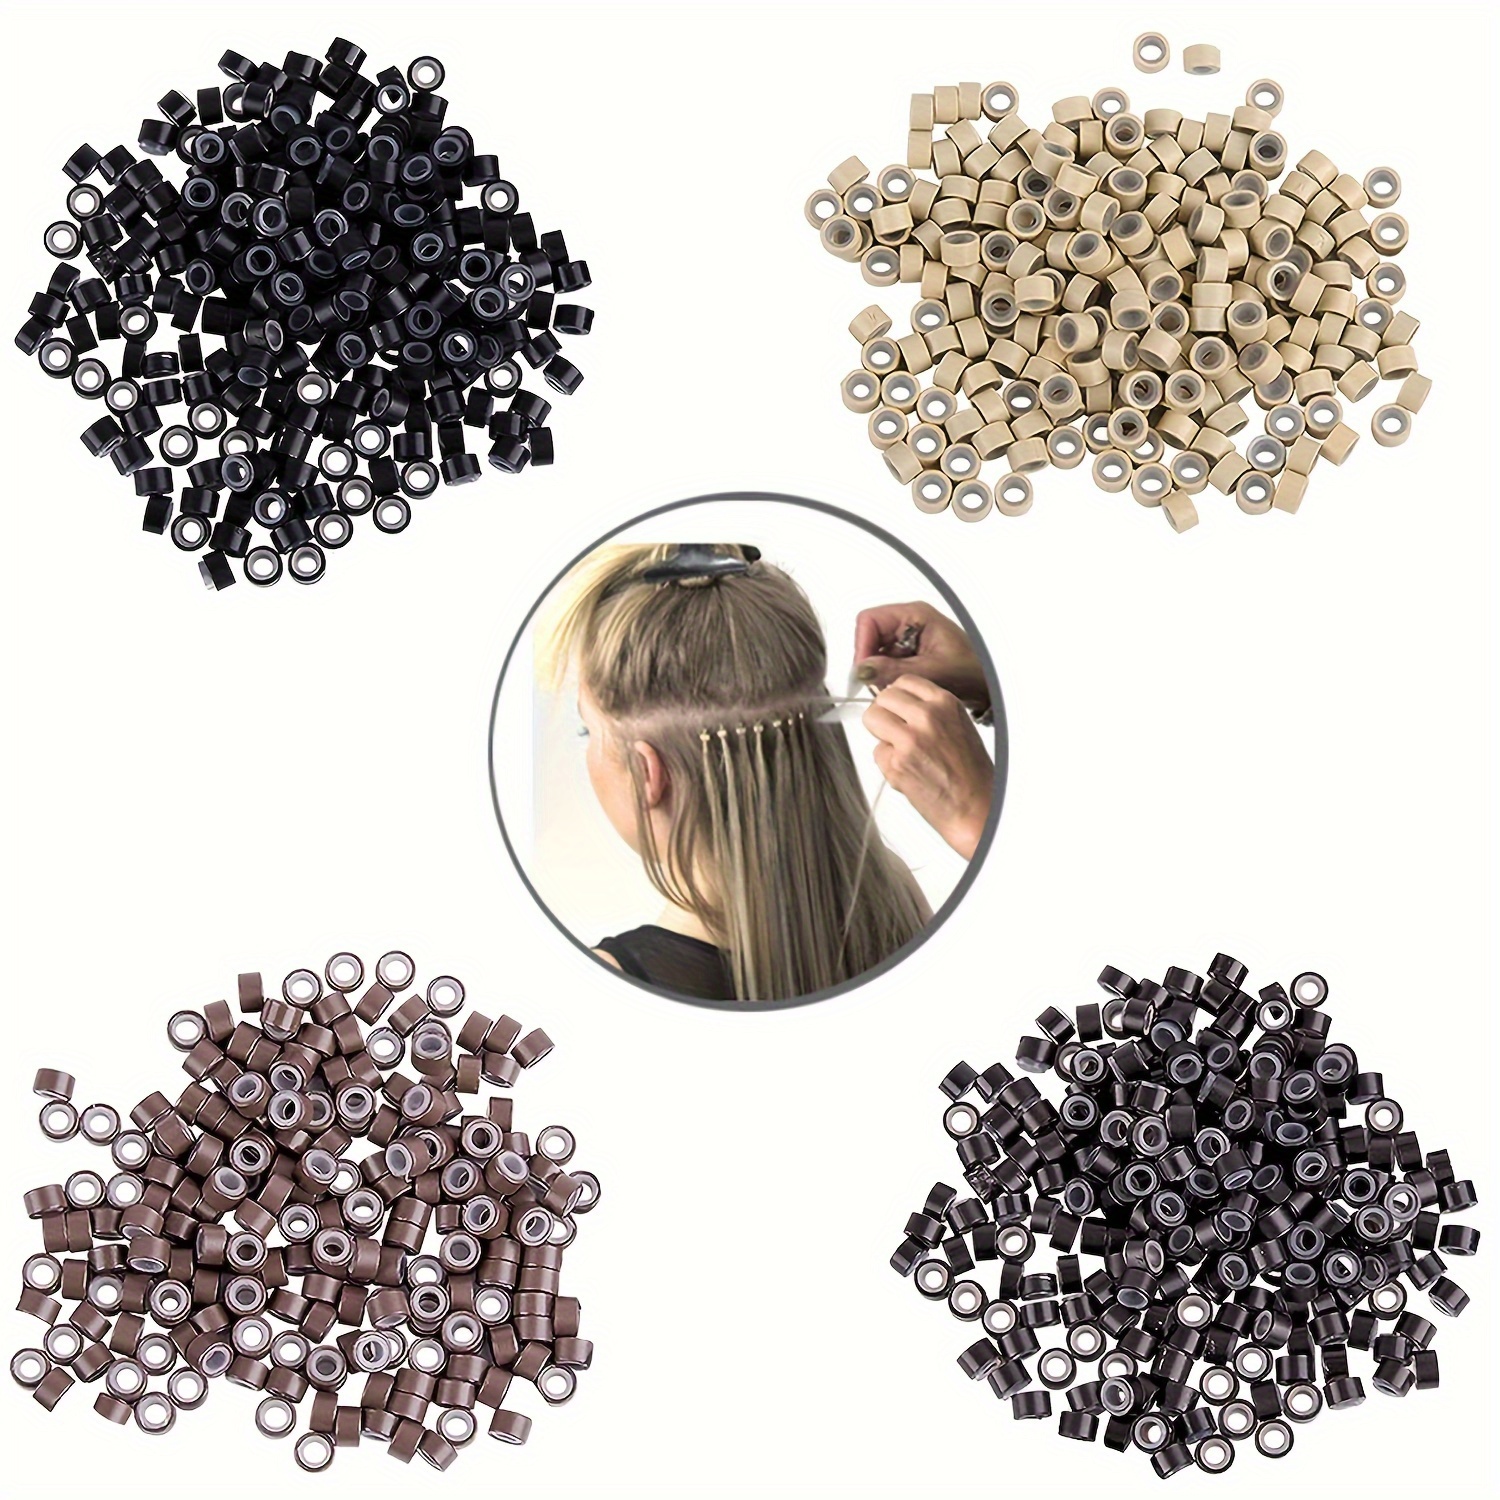 Hair Extension Beads with Silicone-2500 Hair Tinsel Beads, Microlinks beads